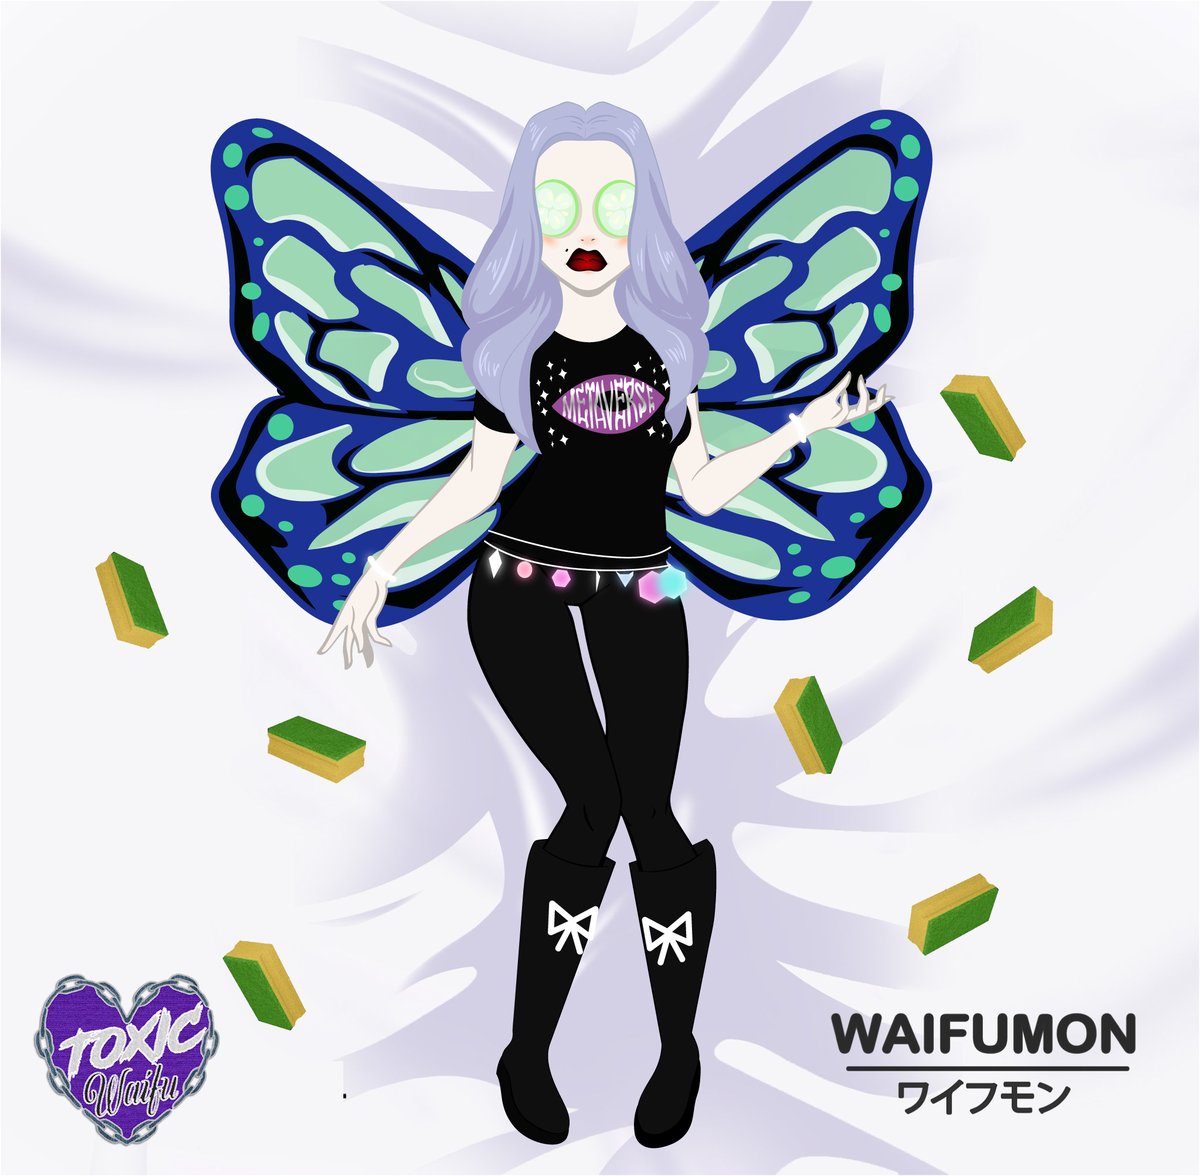 Day #1,168 EVERYONE is a winner! 🧚‍♀️🥳🎉
FREE NFT to ALL that post wallet # or $ETH or Metamask address below! This one for amazing @toxicwaifudcl ! @aaronleupp @decentraland #NFTGiveaway airdrop no Pokémon POAP Anime Waifu Bored JPG it a Waifumon! #FreeNFT